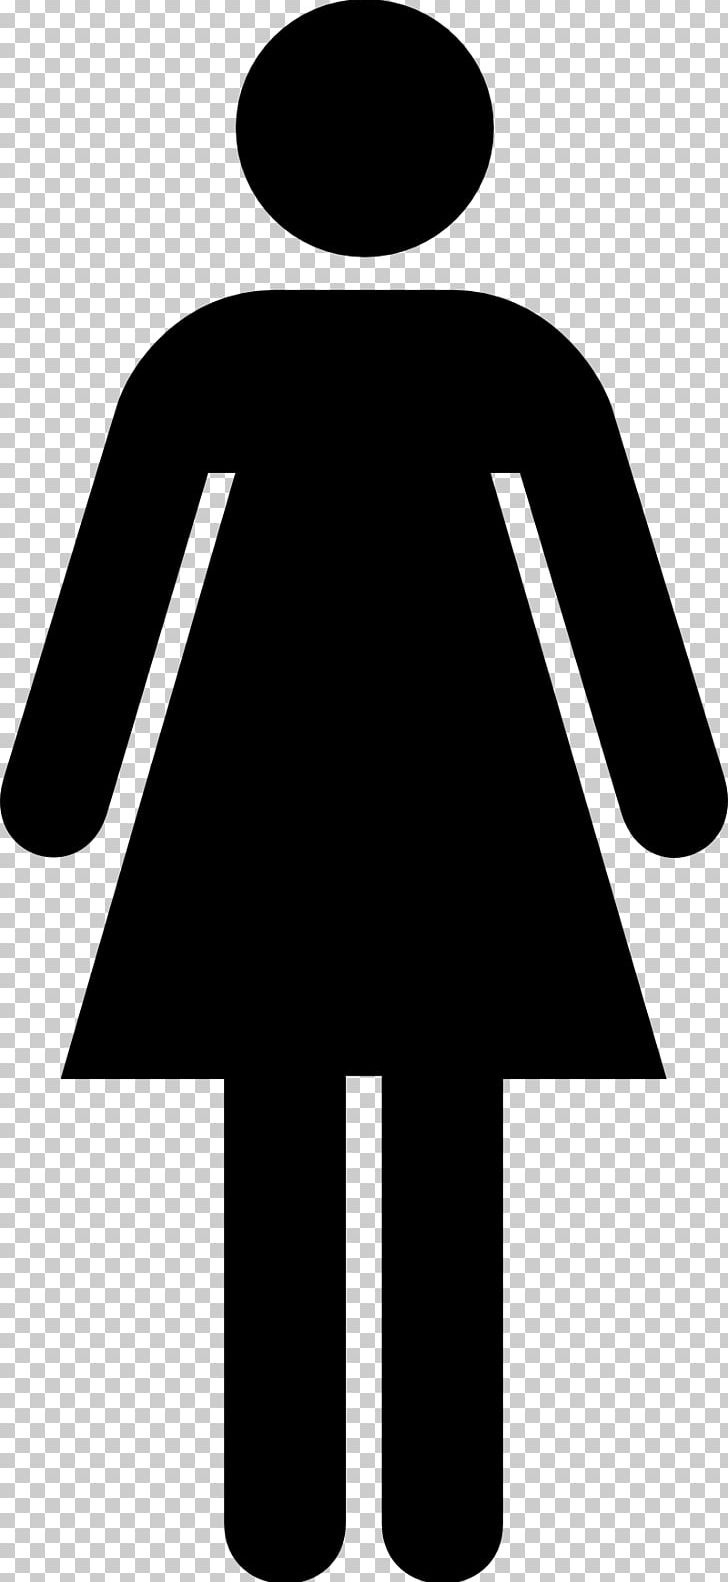 Public Toilet Bathroom Female Woman PNG, Clipart, Angle, Bathroom, Black, Black And White, Computer Icons Free PNG Download